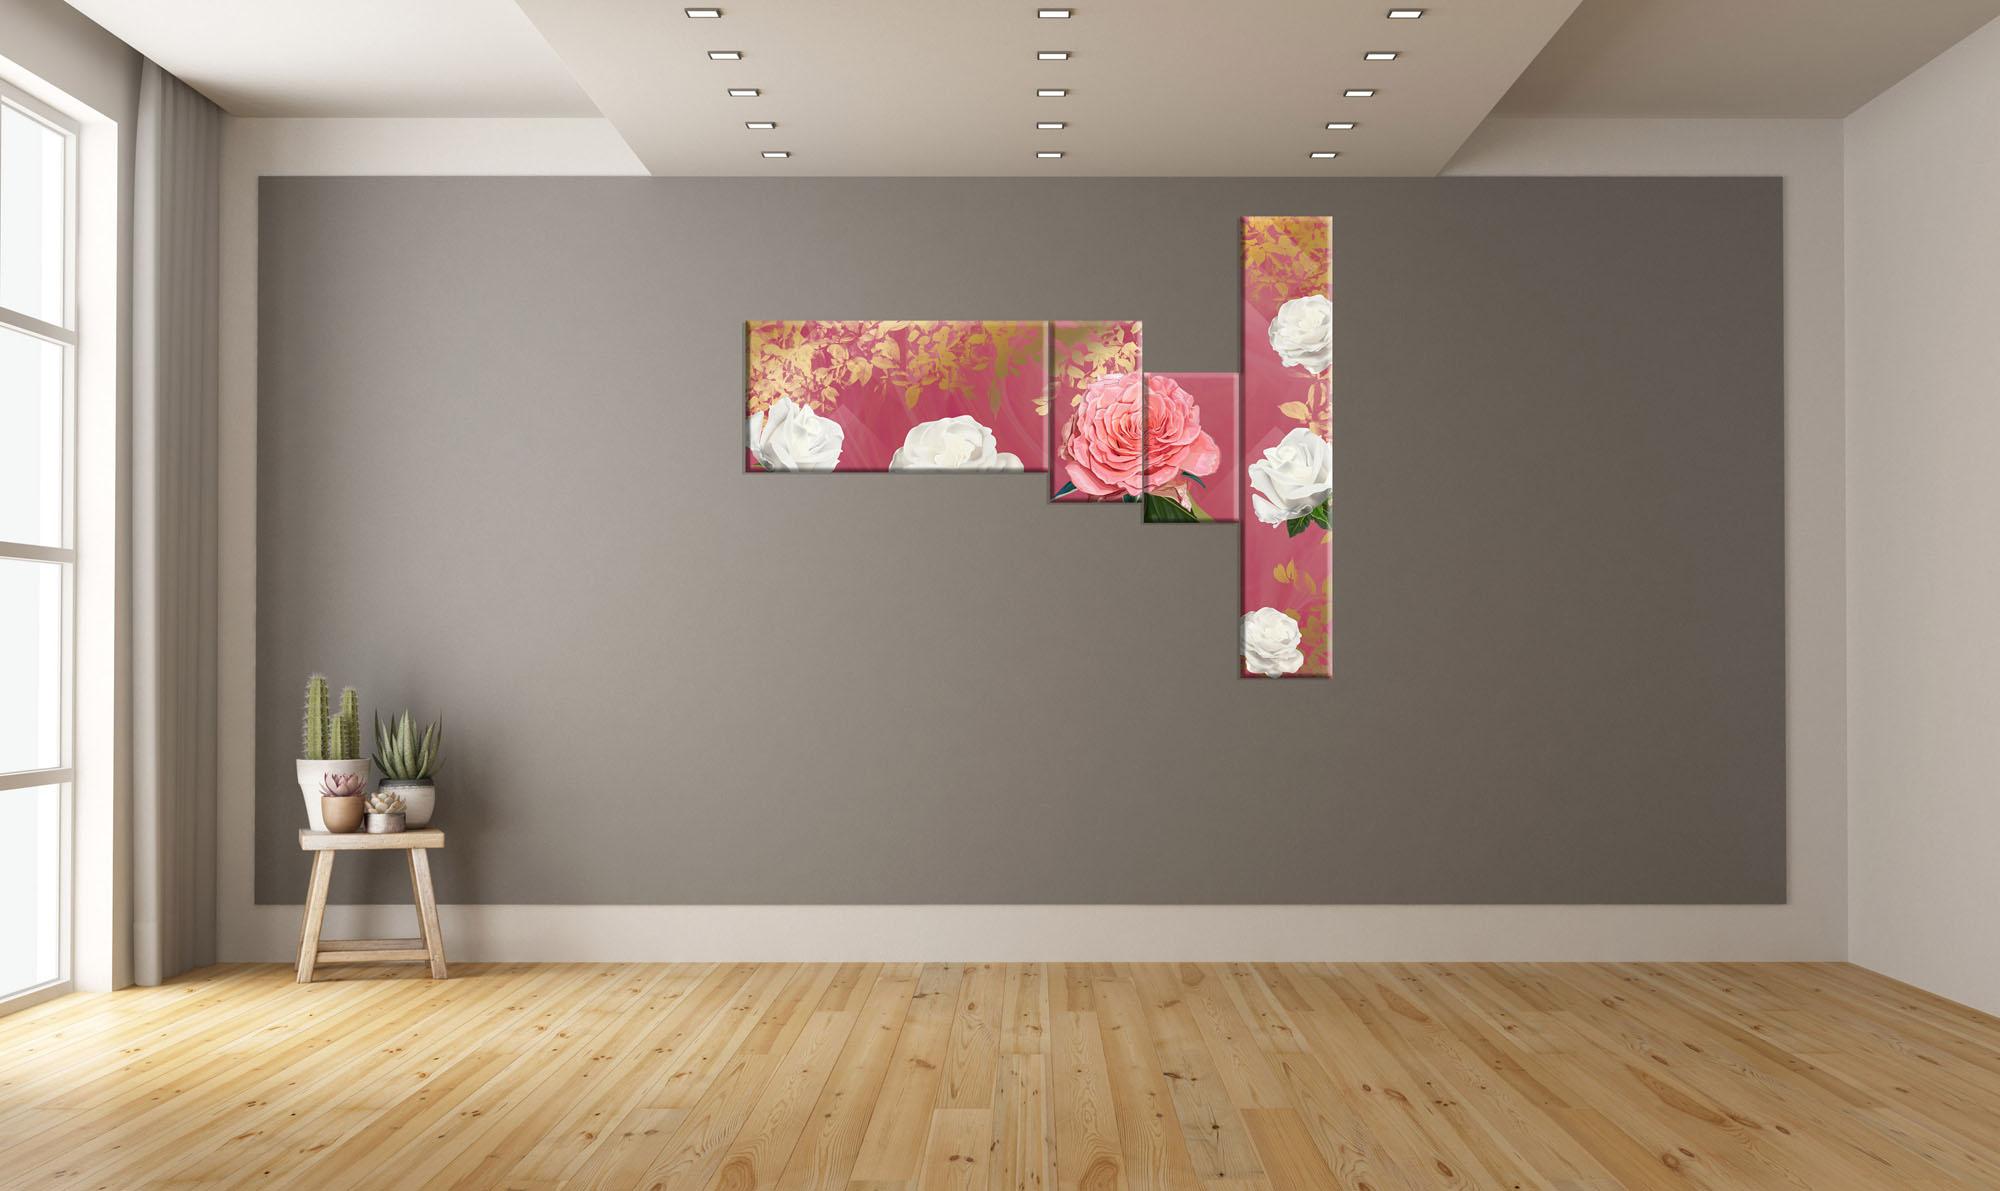 Modular picture - blooming roses on a red background